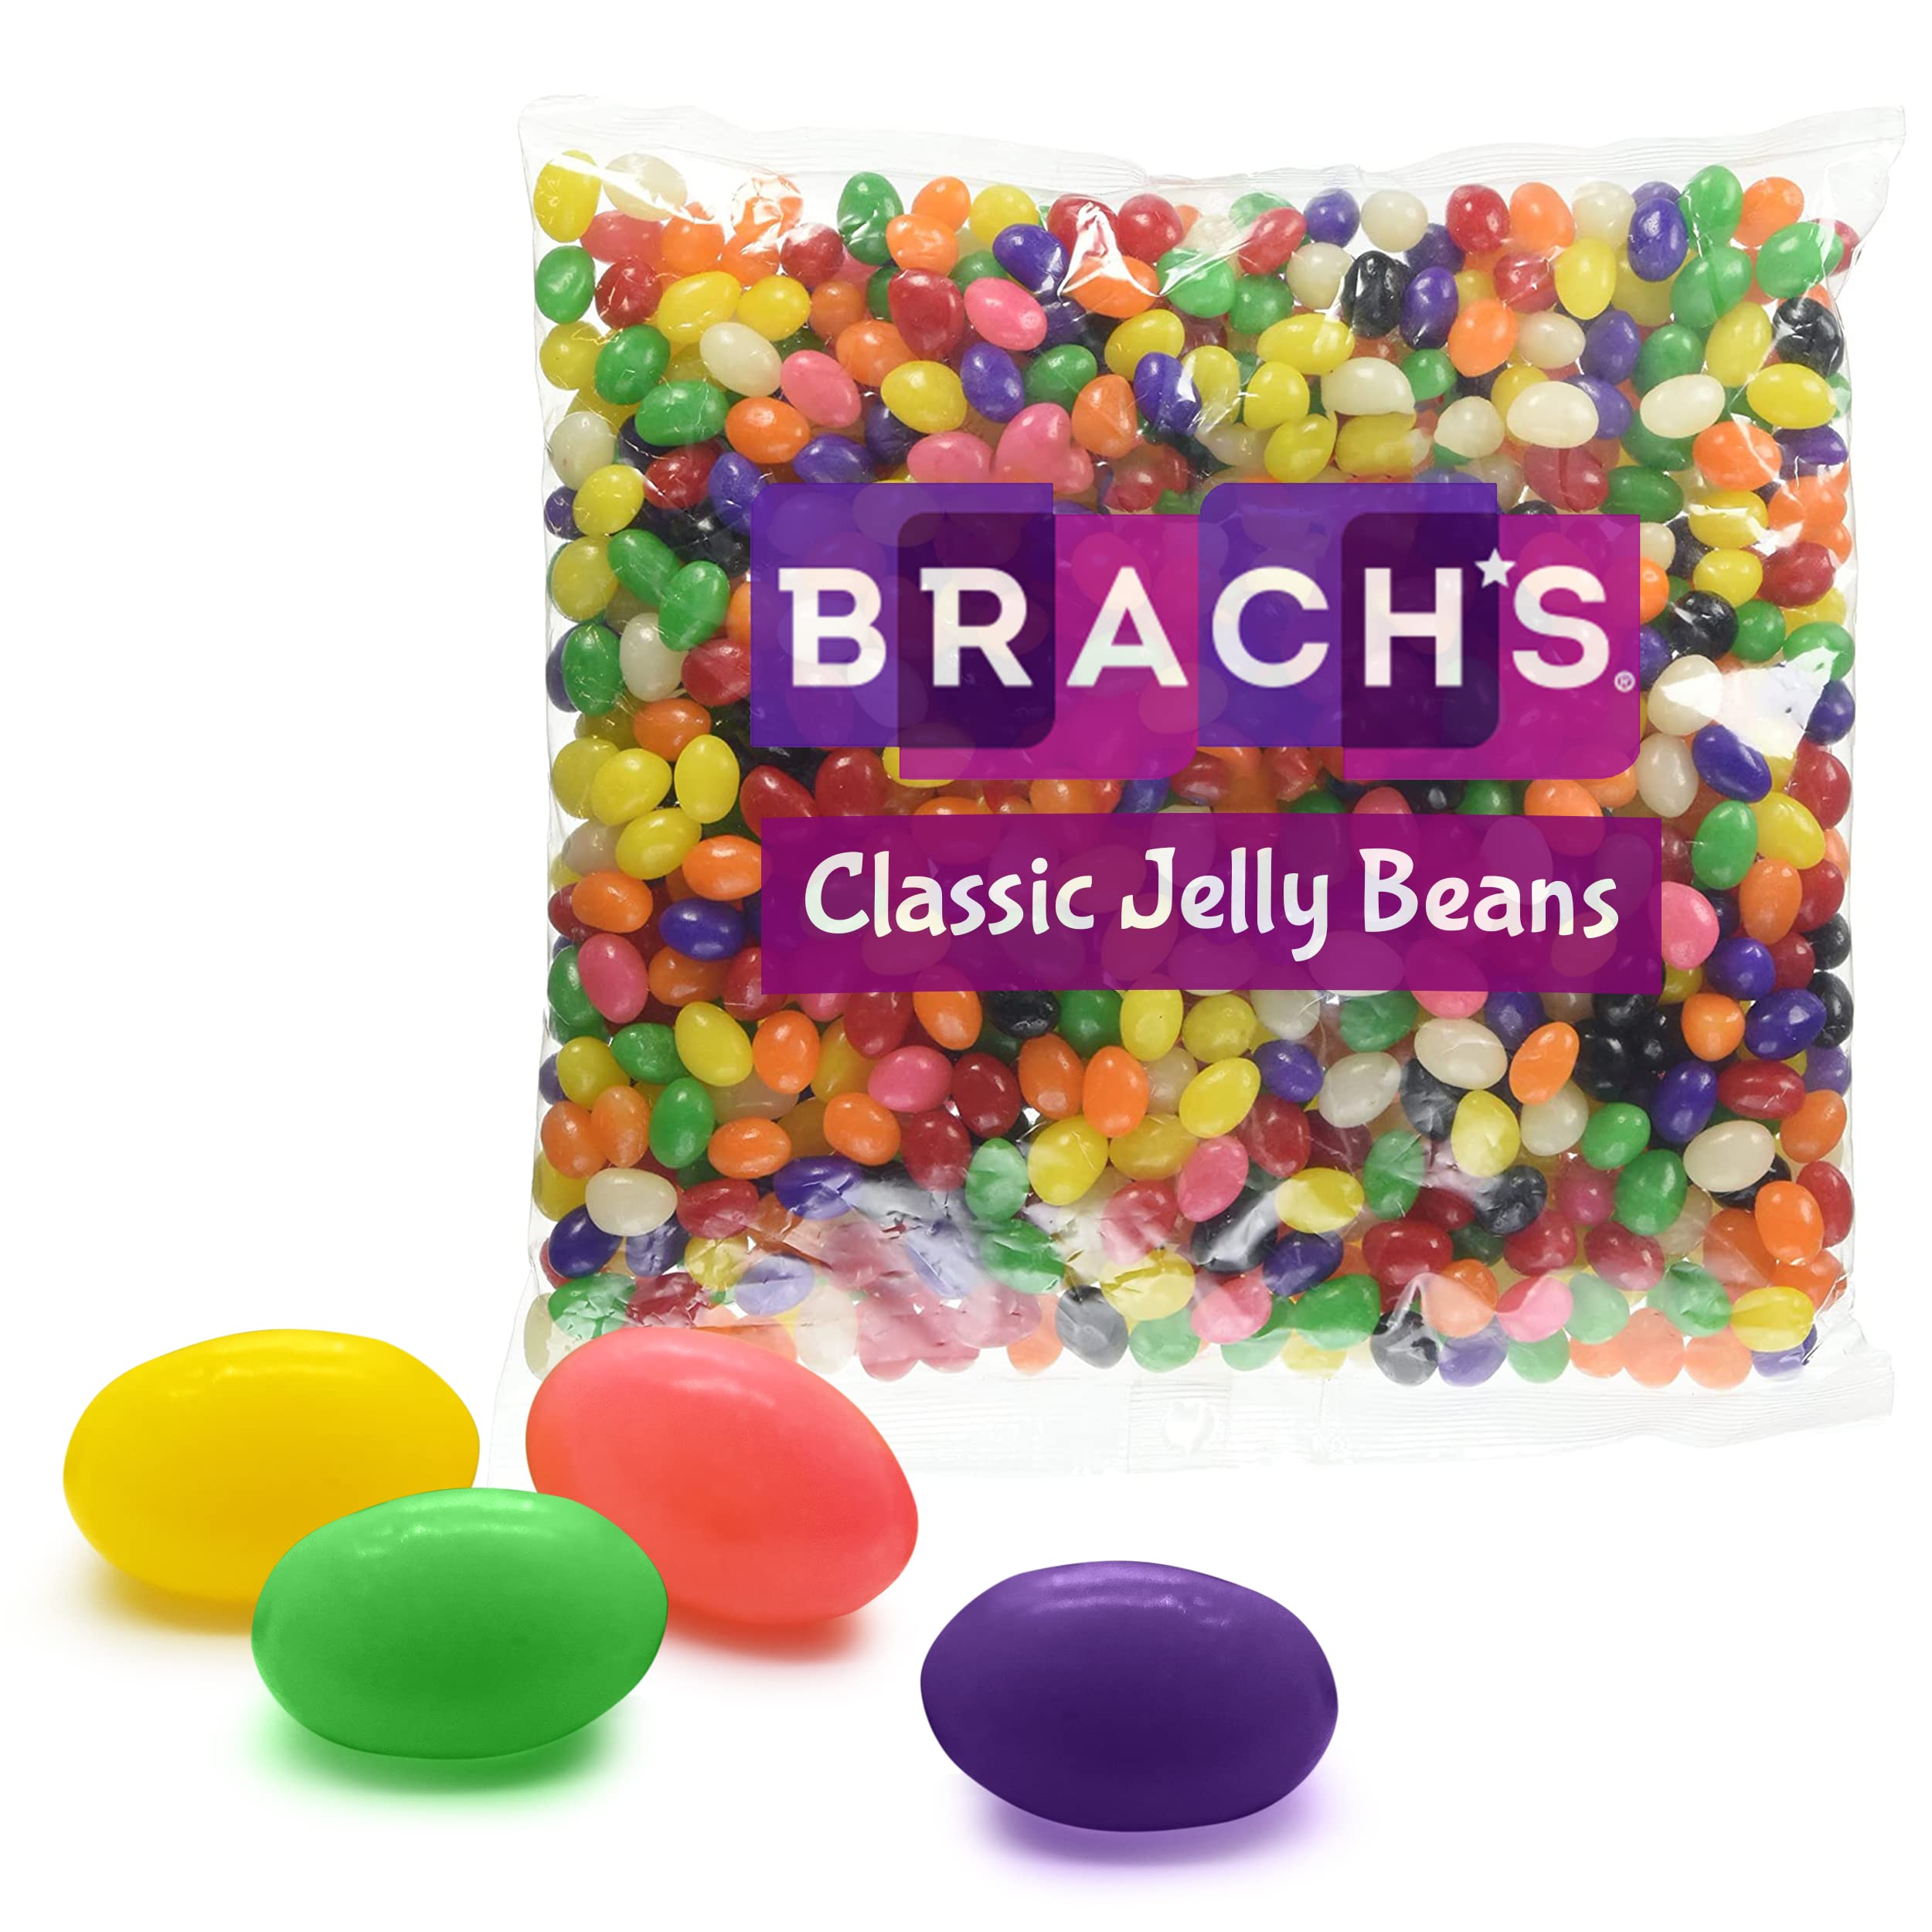 Brach's Classic Jelly Beans 2LB Bulk Candy Bag - Candy Variety Pack with  Delicious and Intense Fruity